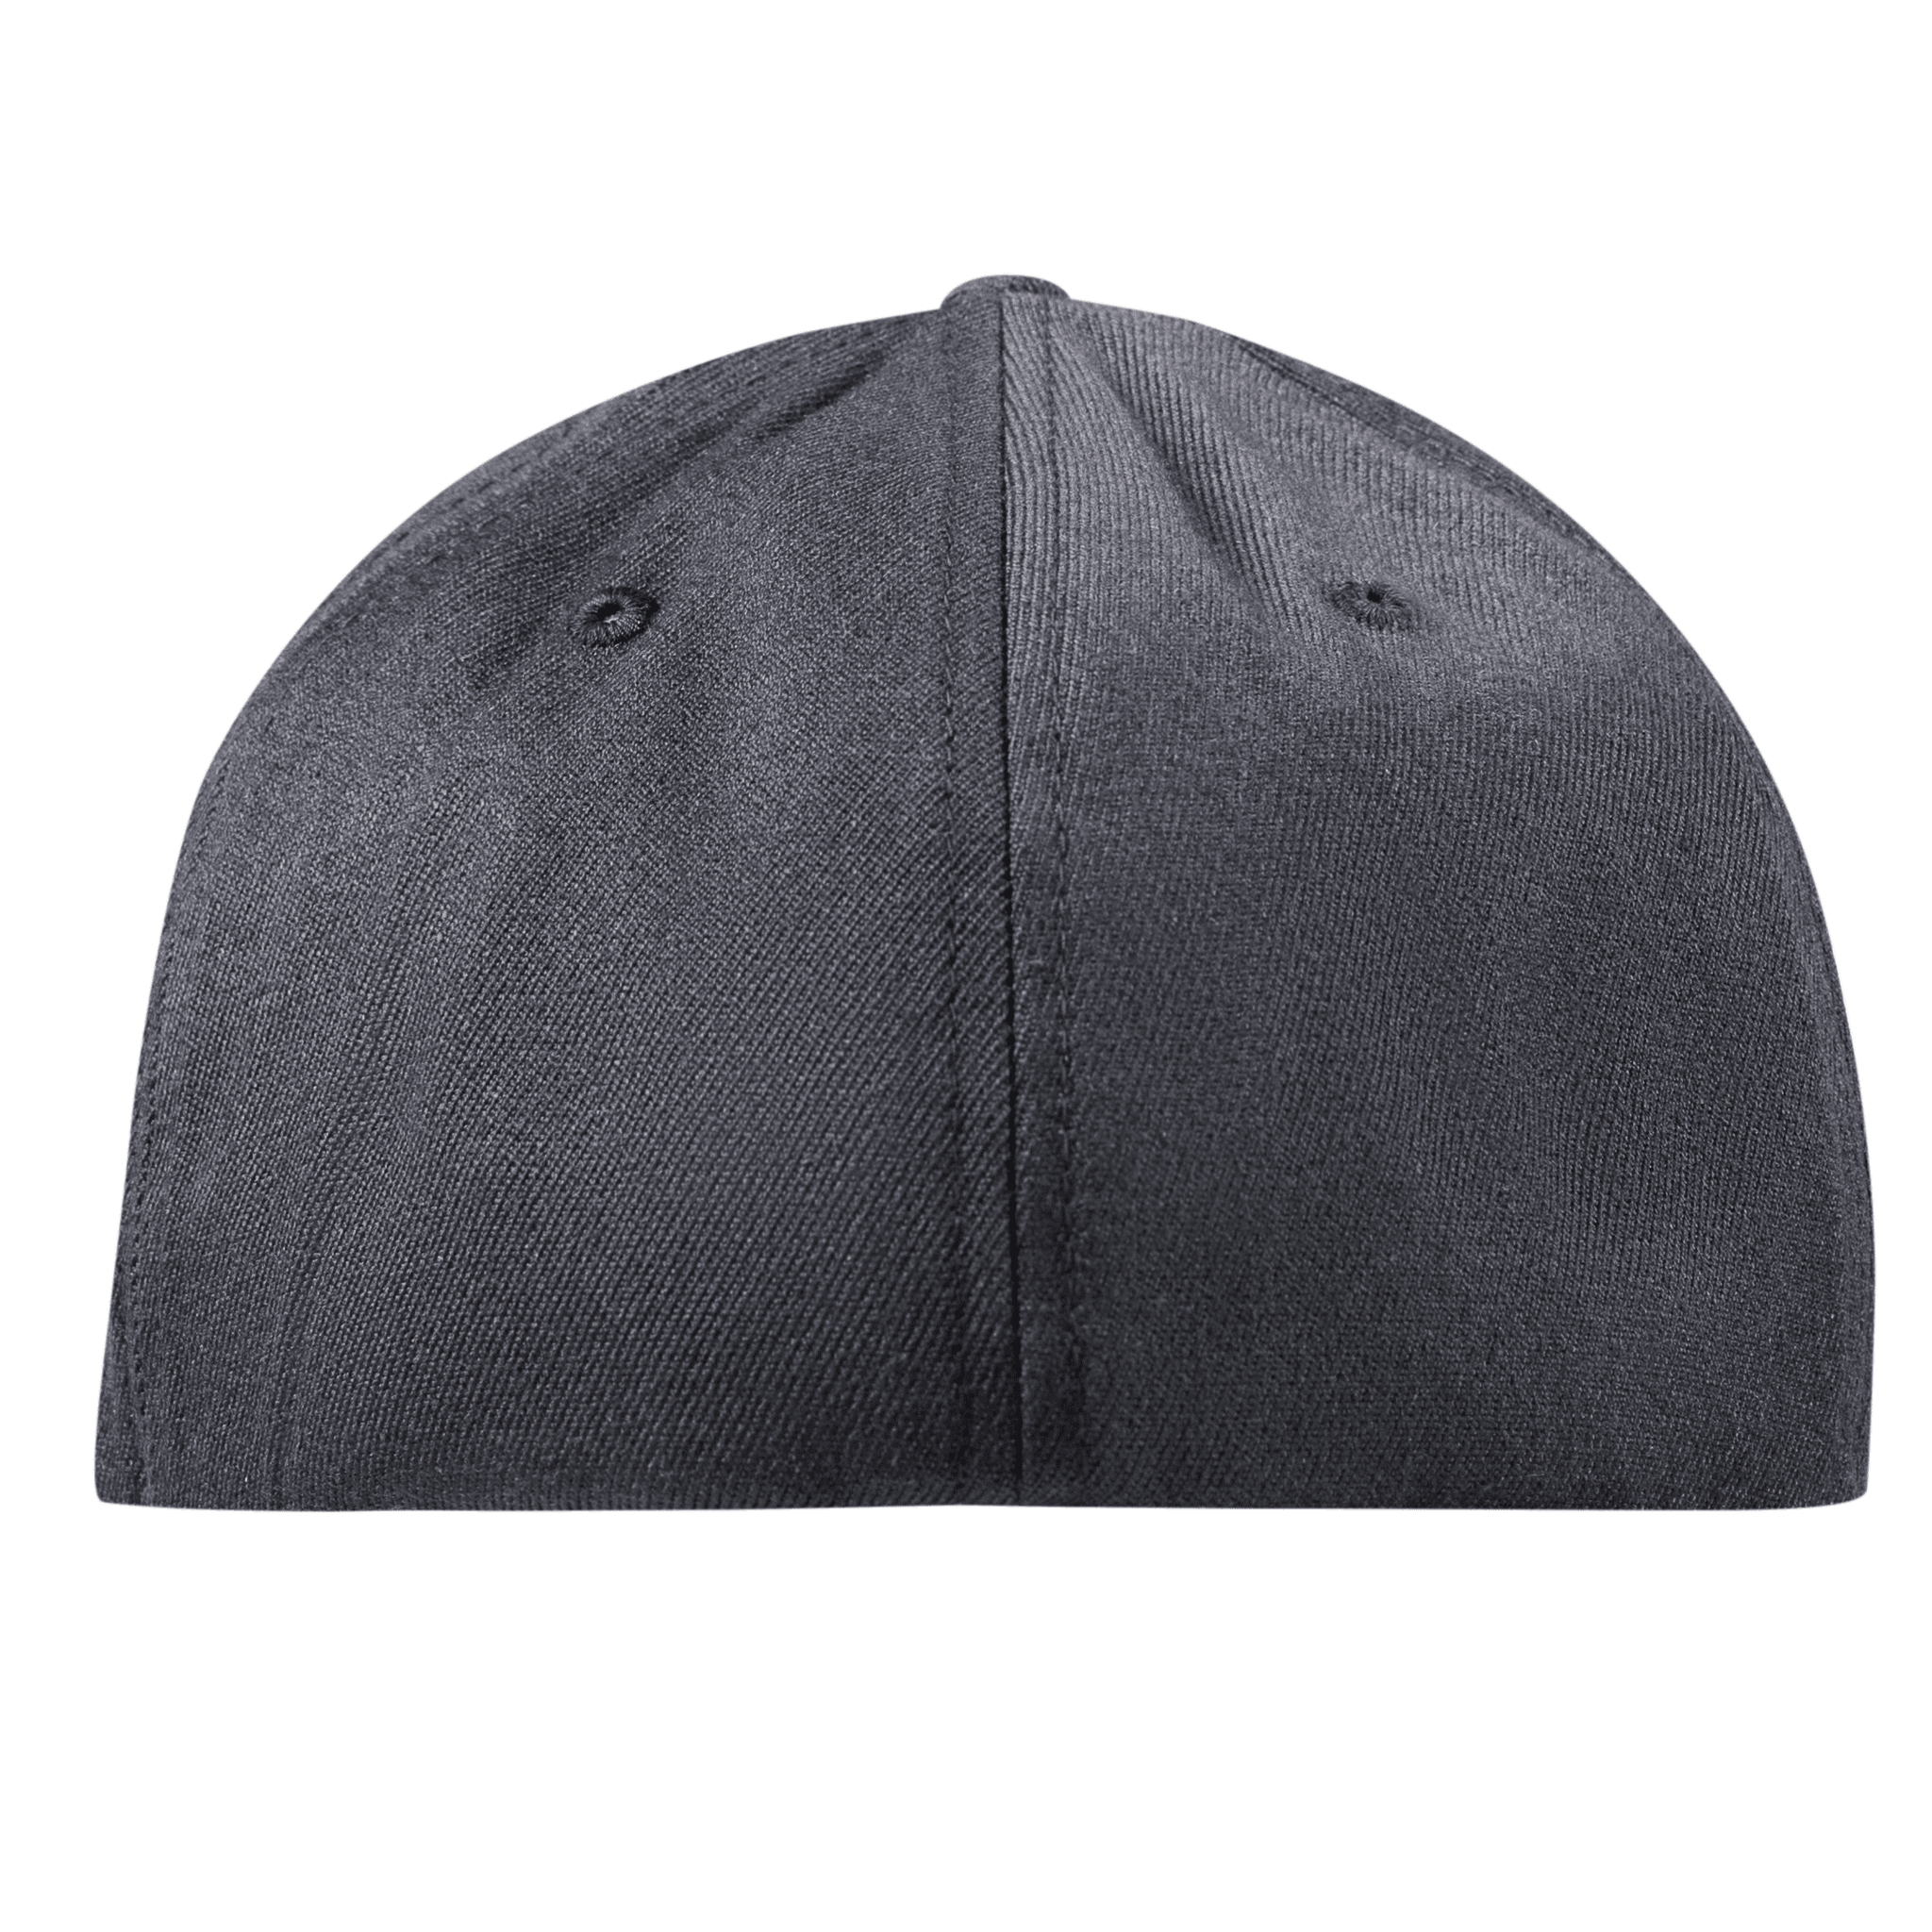 Wisconsin 30 Midnight Flexfit Fitted Back Charcoal